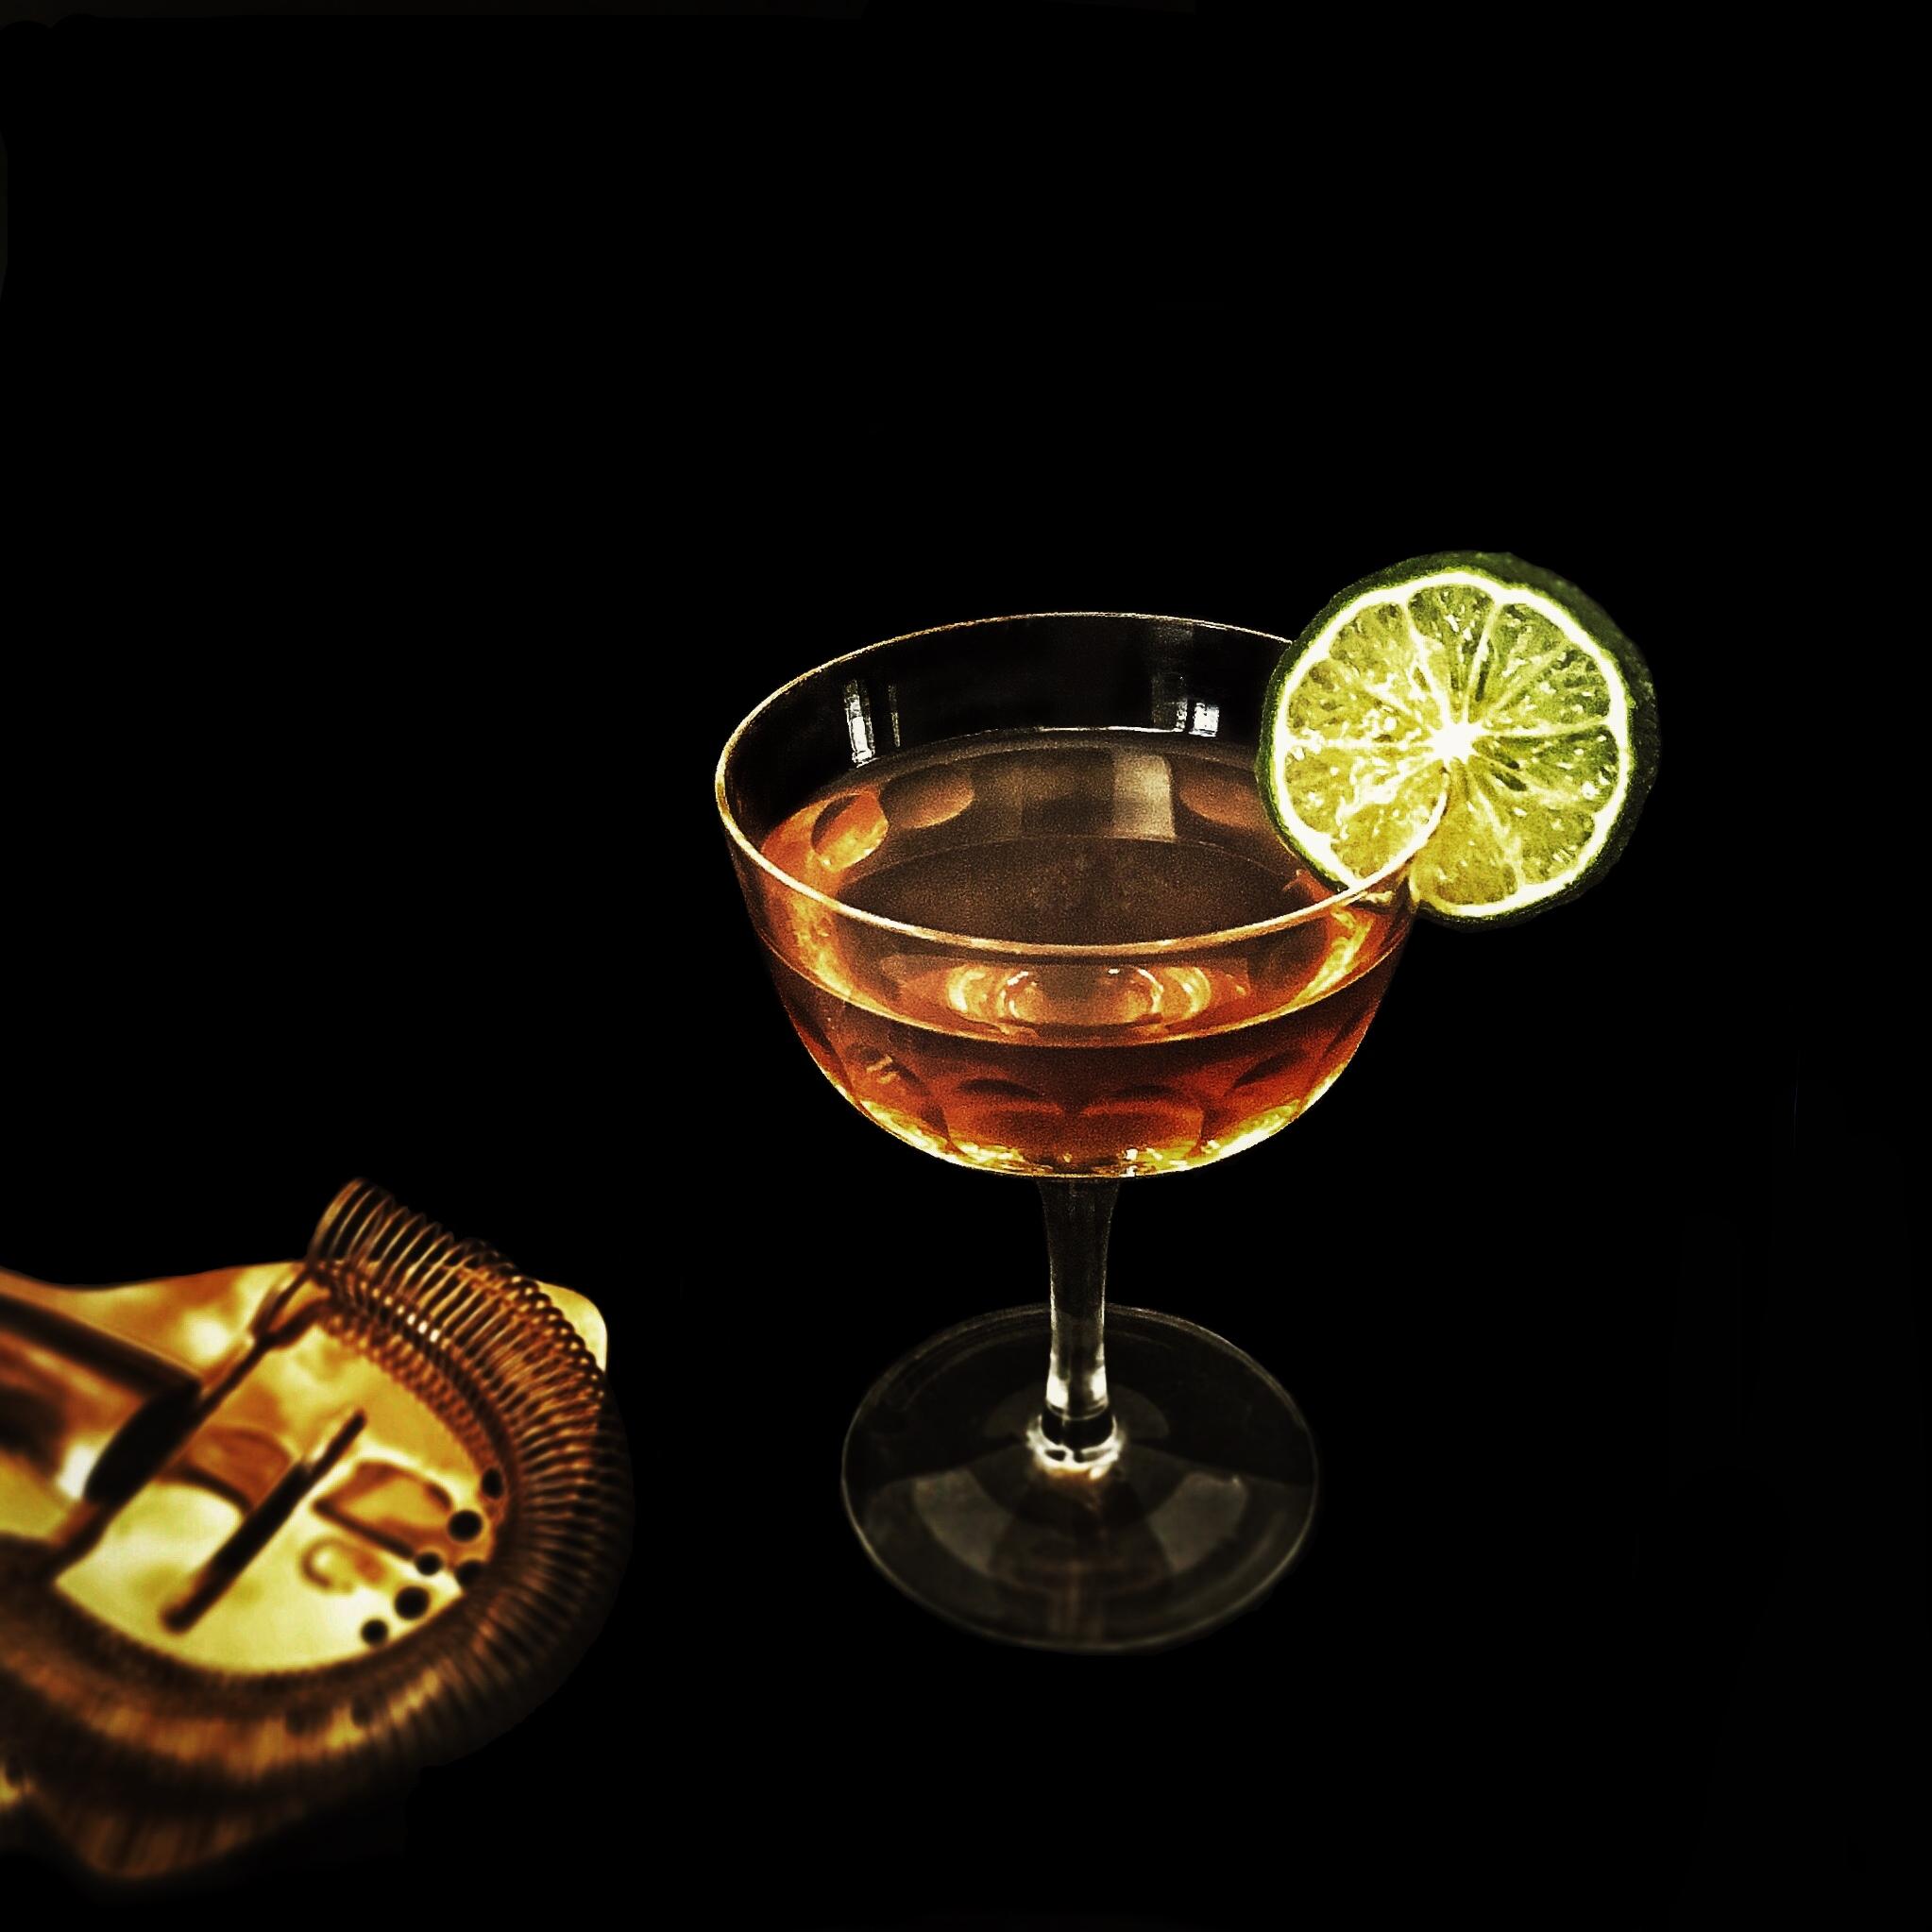  Take your taste buds on a spicy journey with the Gvc cocktail.